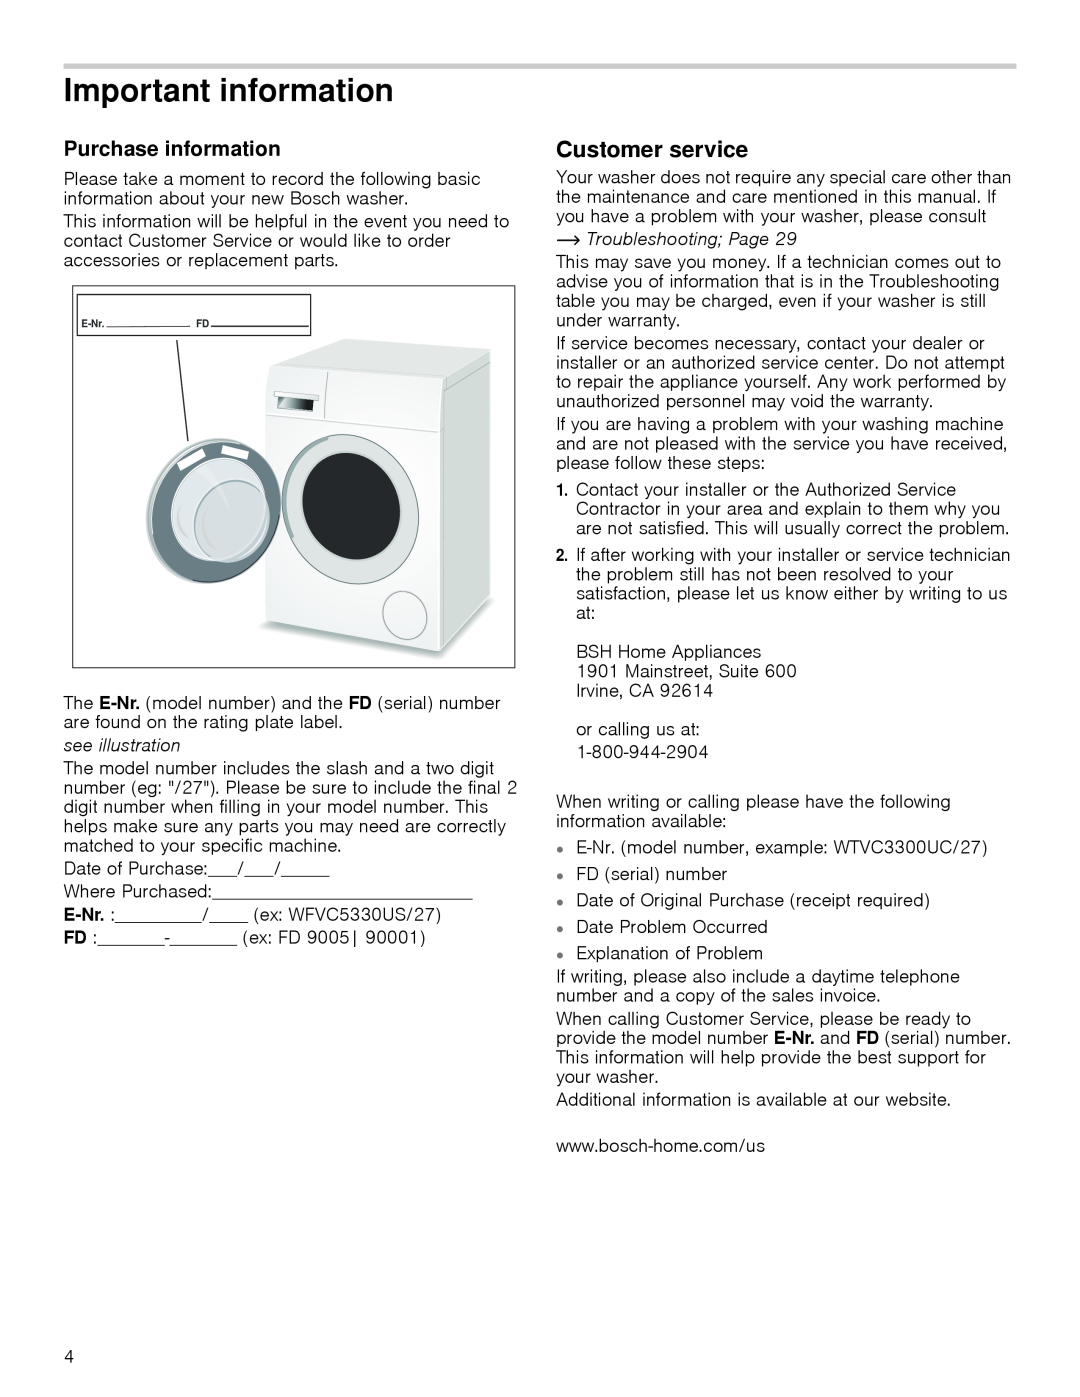 Bosch Appliances WAP24201UC manual Important information, Customer service, Purchase information, see illustration 